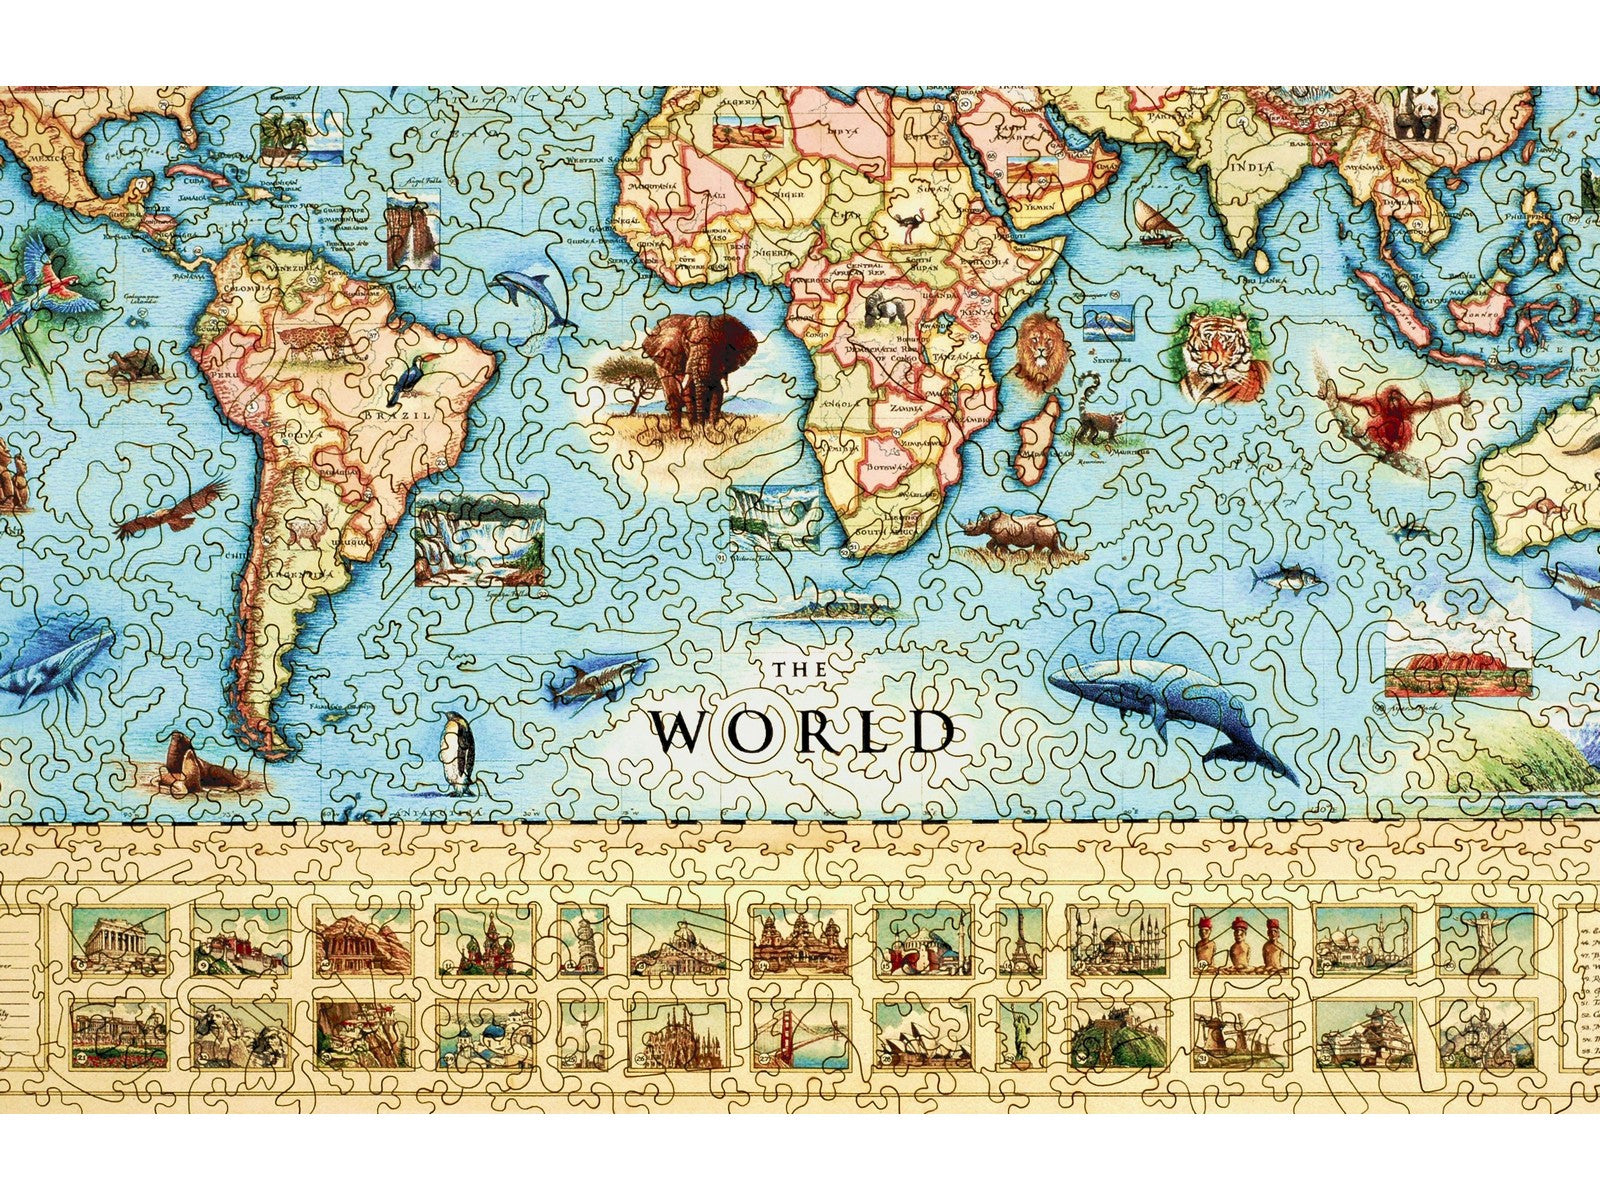 Giant World Map Puzzle - Sugarcup Trading